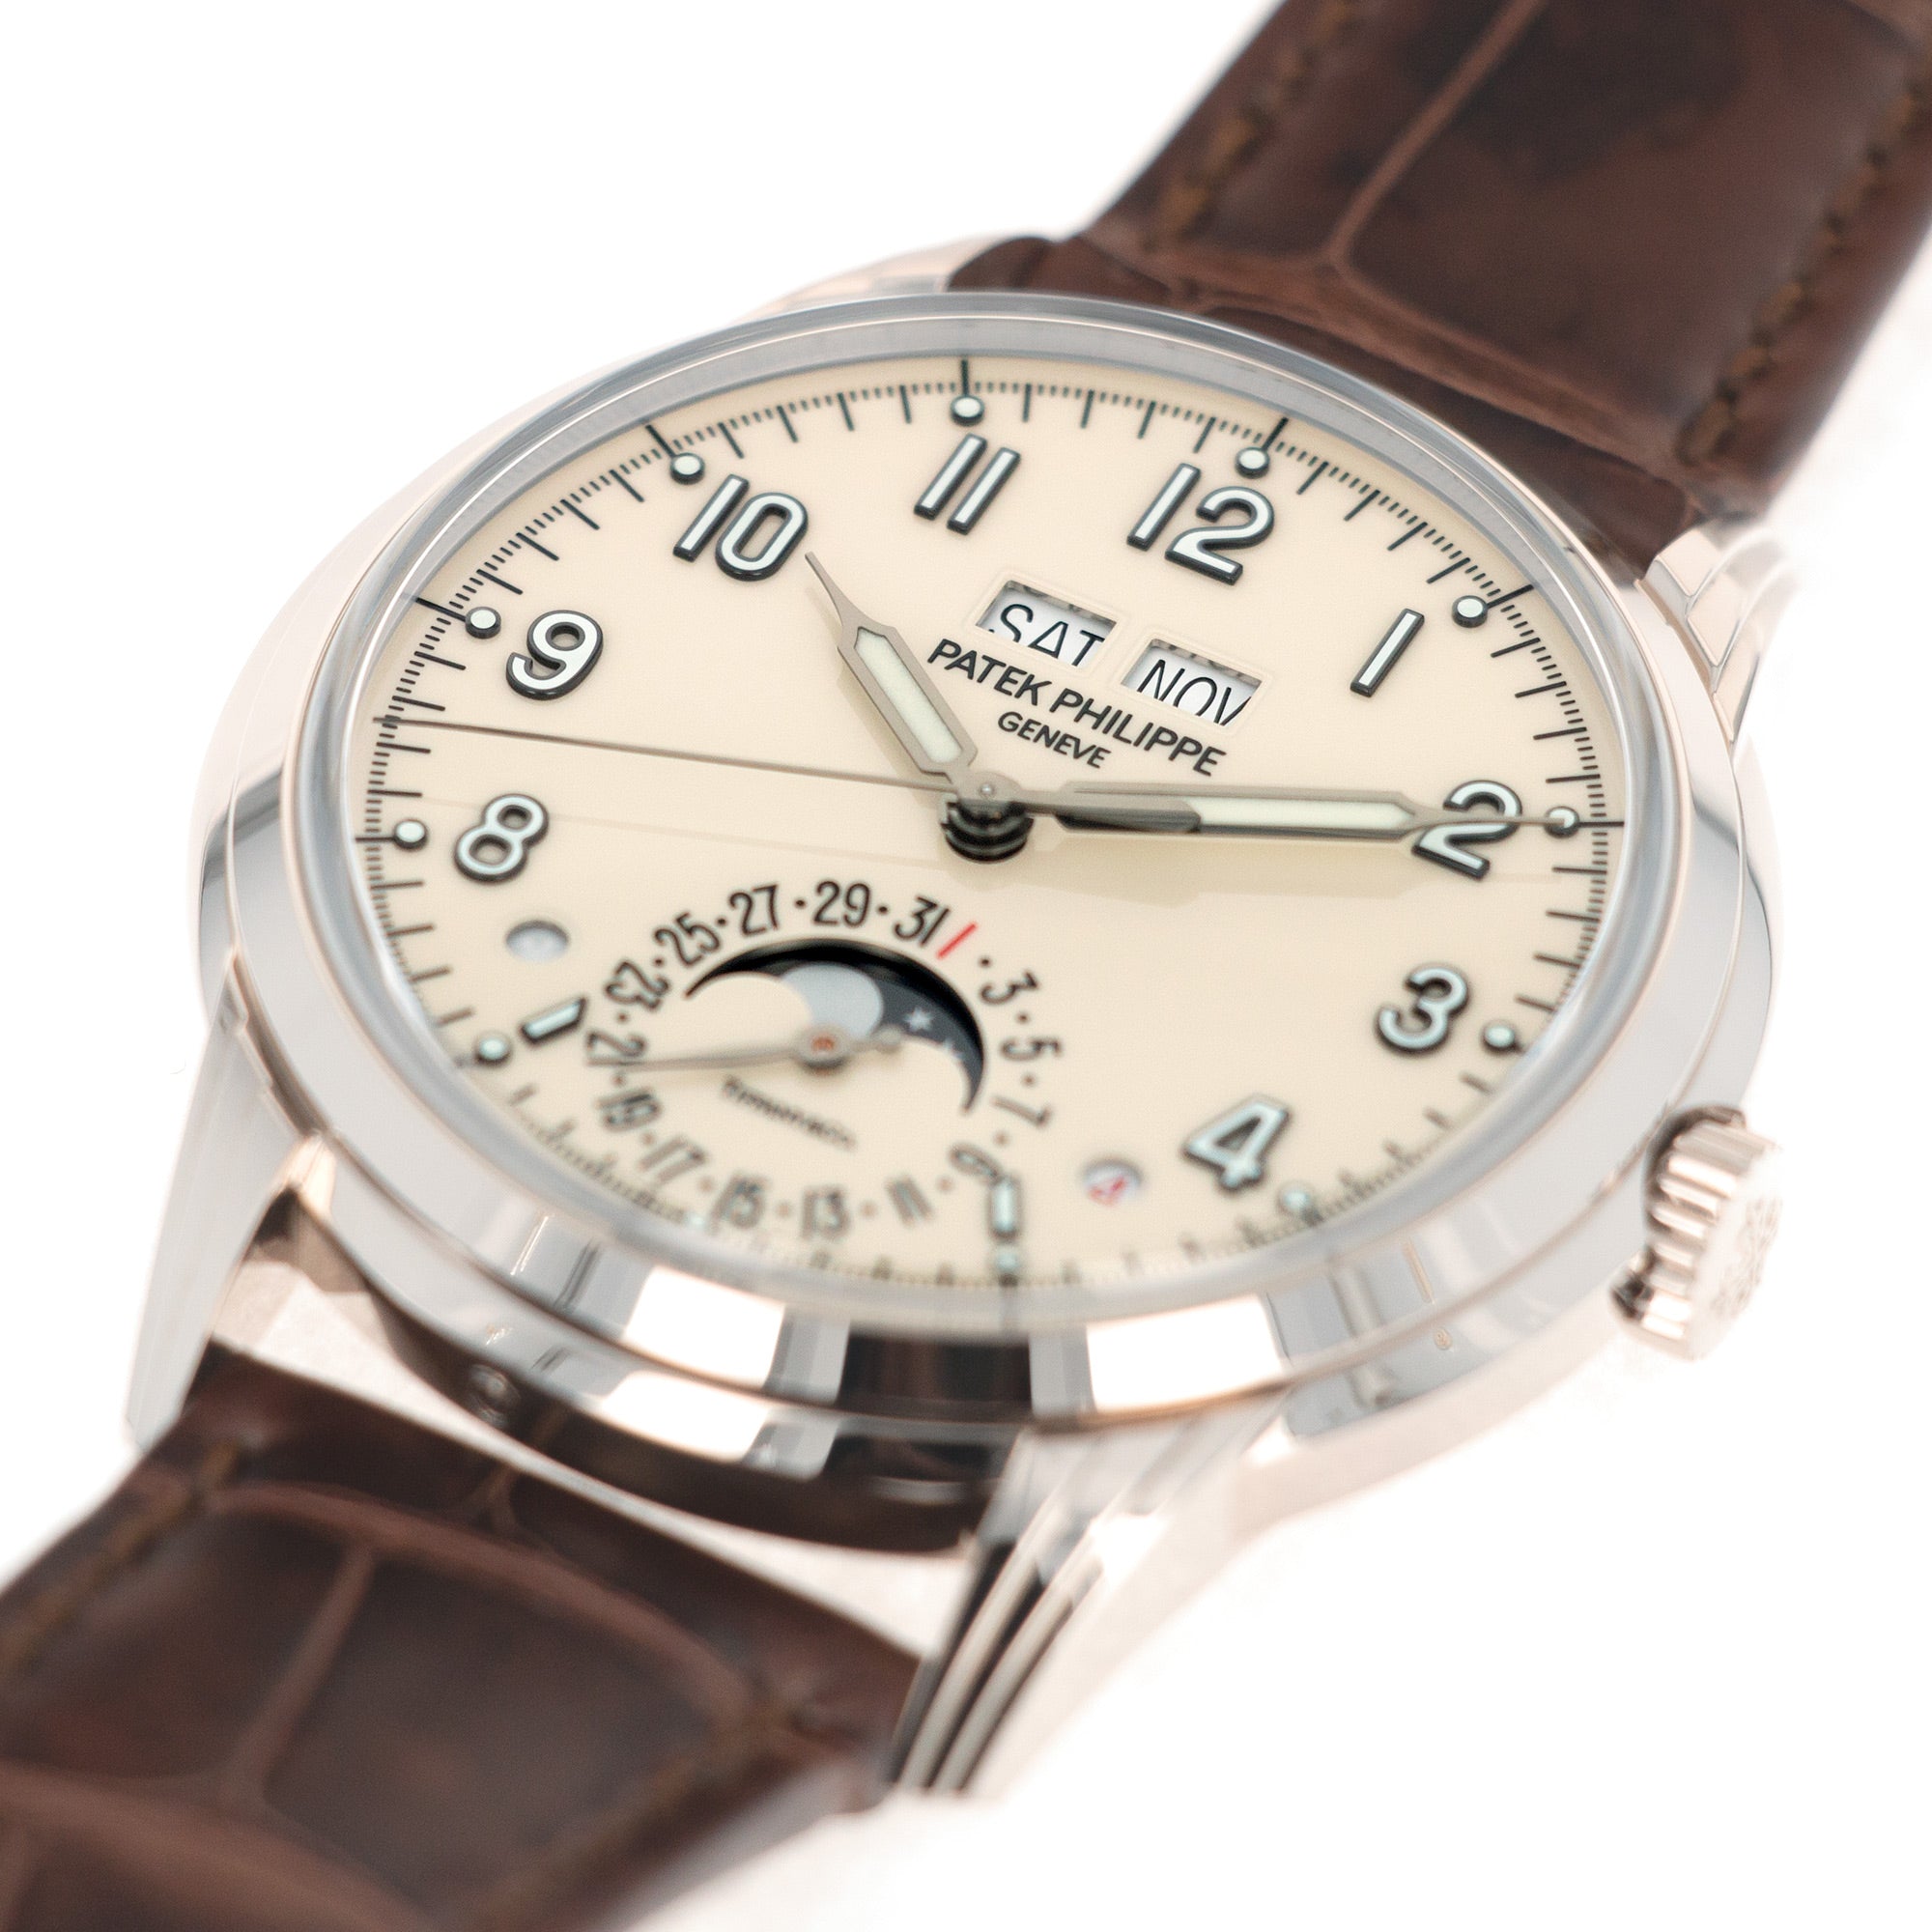 Patek Philippe - Patek Philippe White Gold Perpetual Calendar Watch Ref. 5320 retailed by Tiffany &amp; Co. - The Keystone Watches